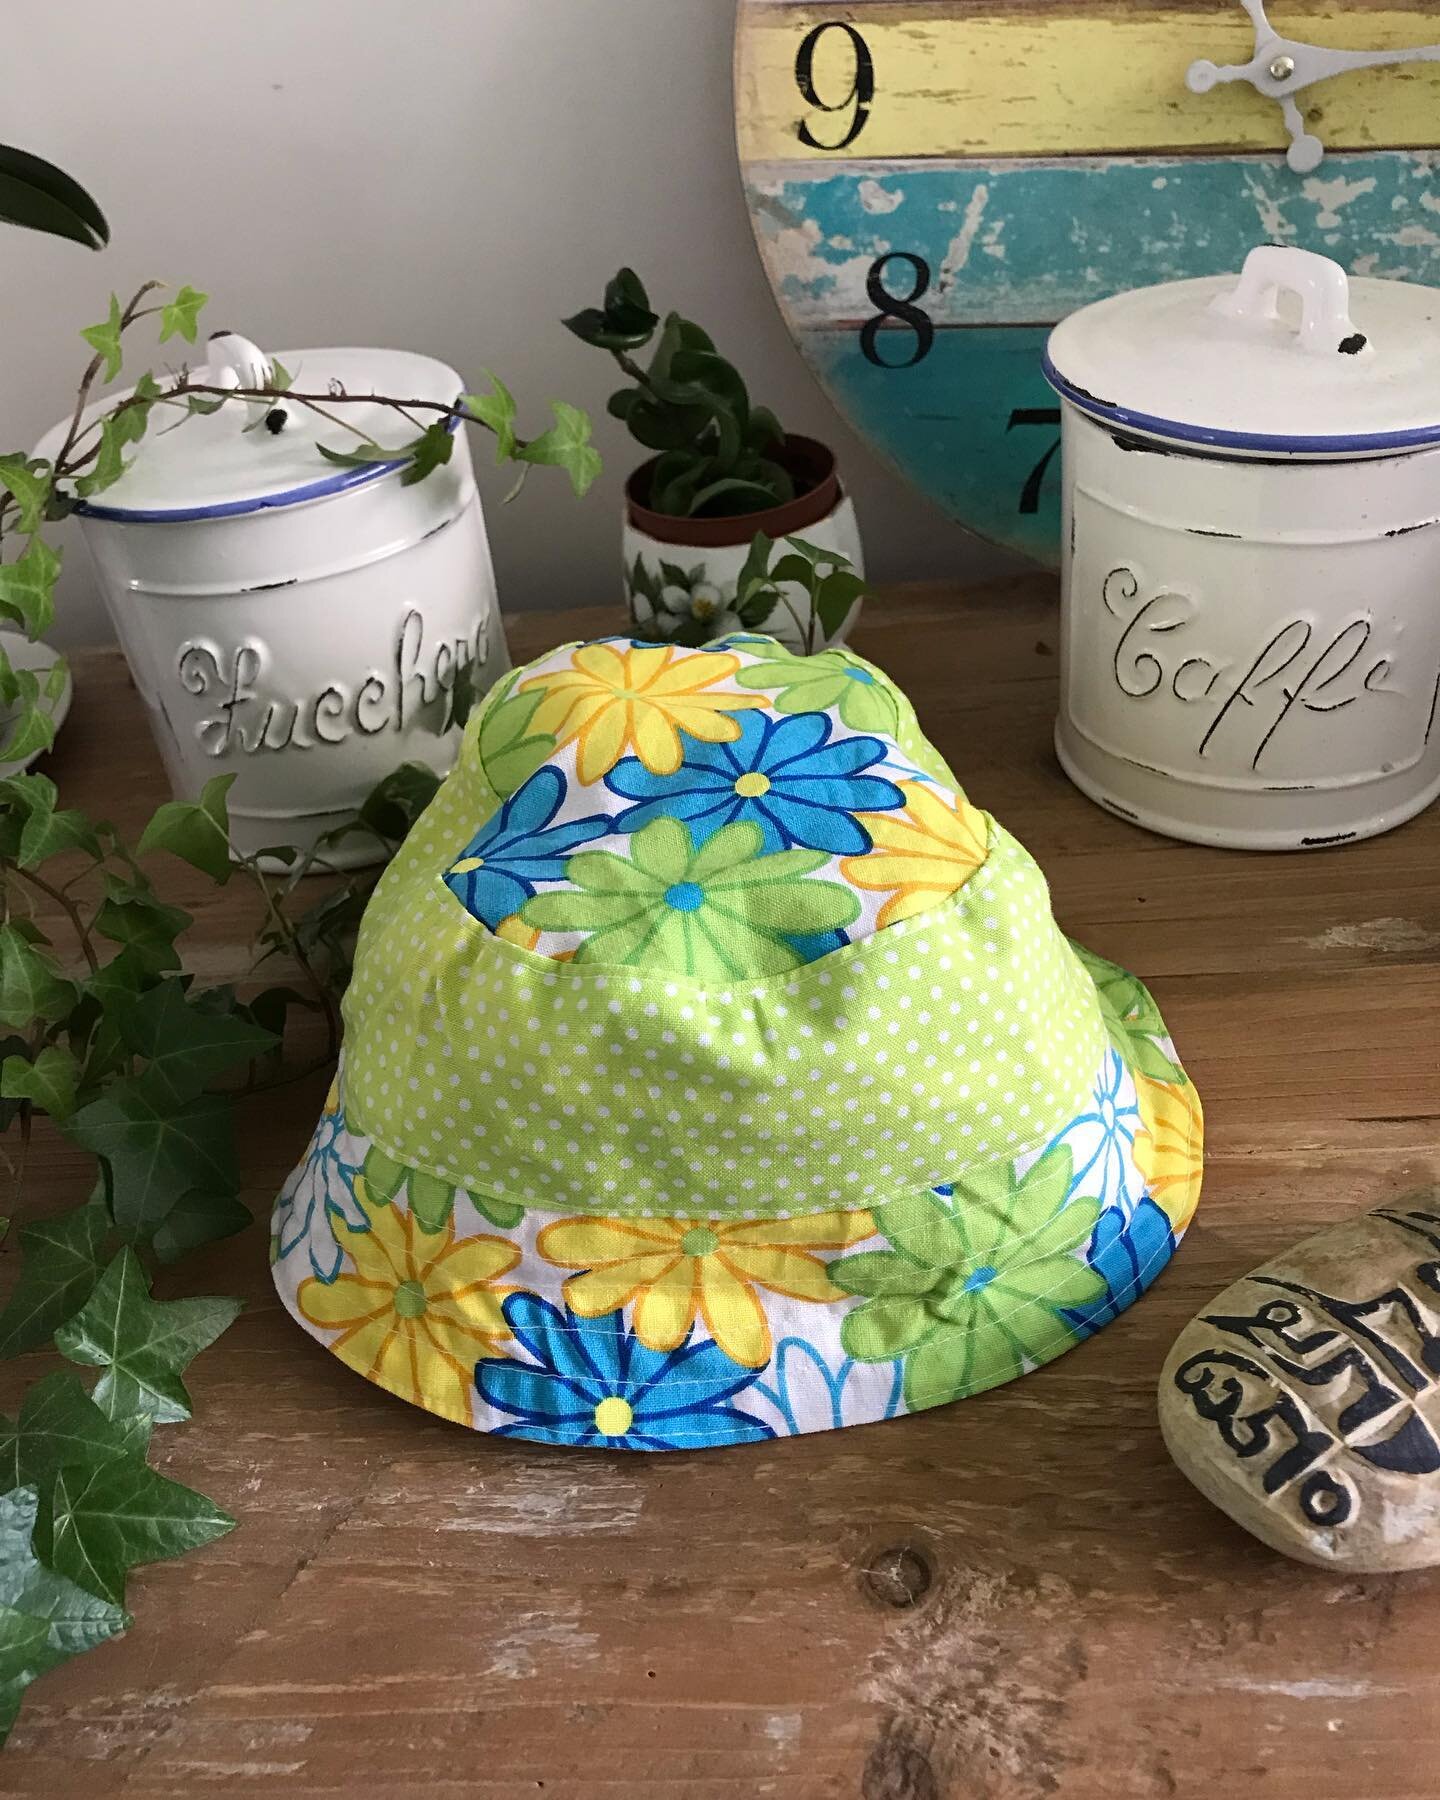 Summer is on it&rsquo;s way so I thought I should work on sun protection for the little ones. The reversible bucket hat is the result. This is the first prototype and I still have some fine tuning to do. Now I have to wait for my model to come back f